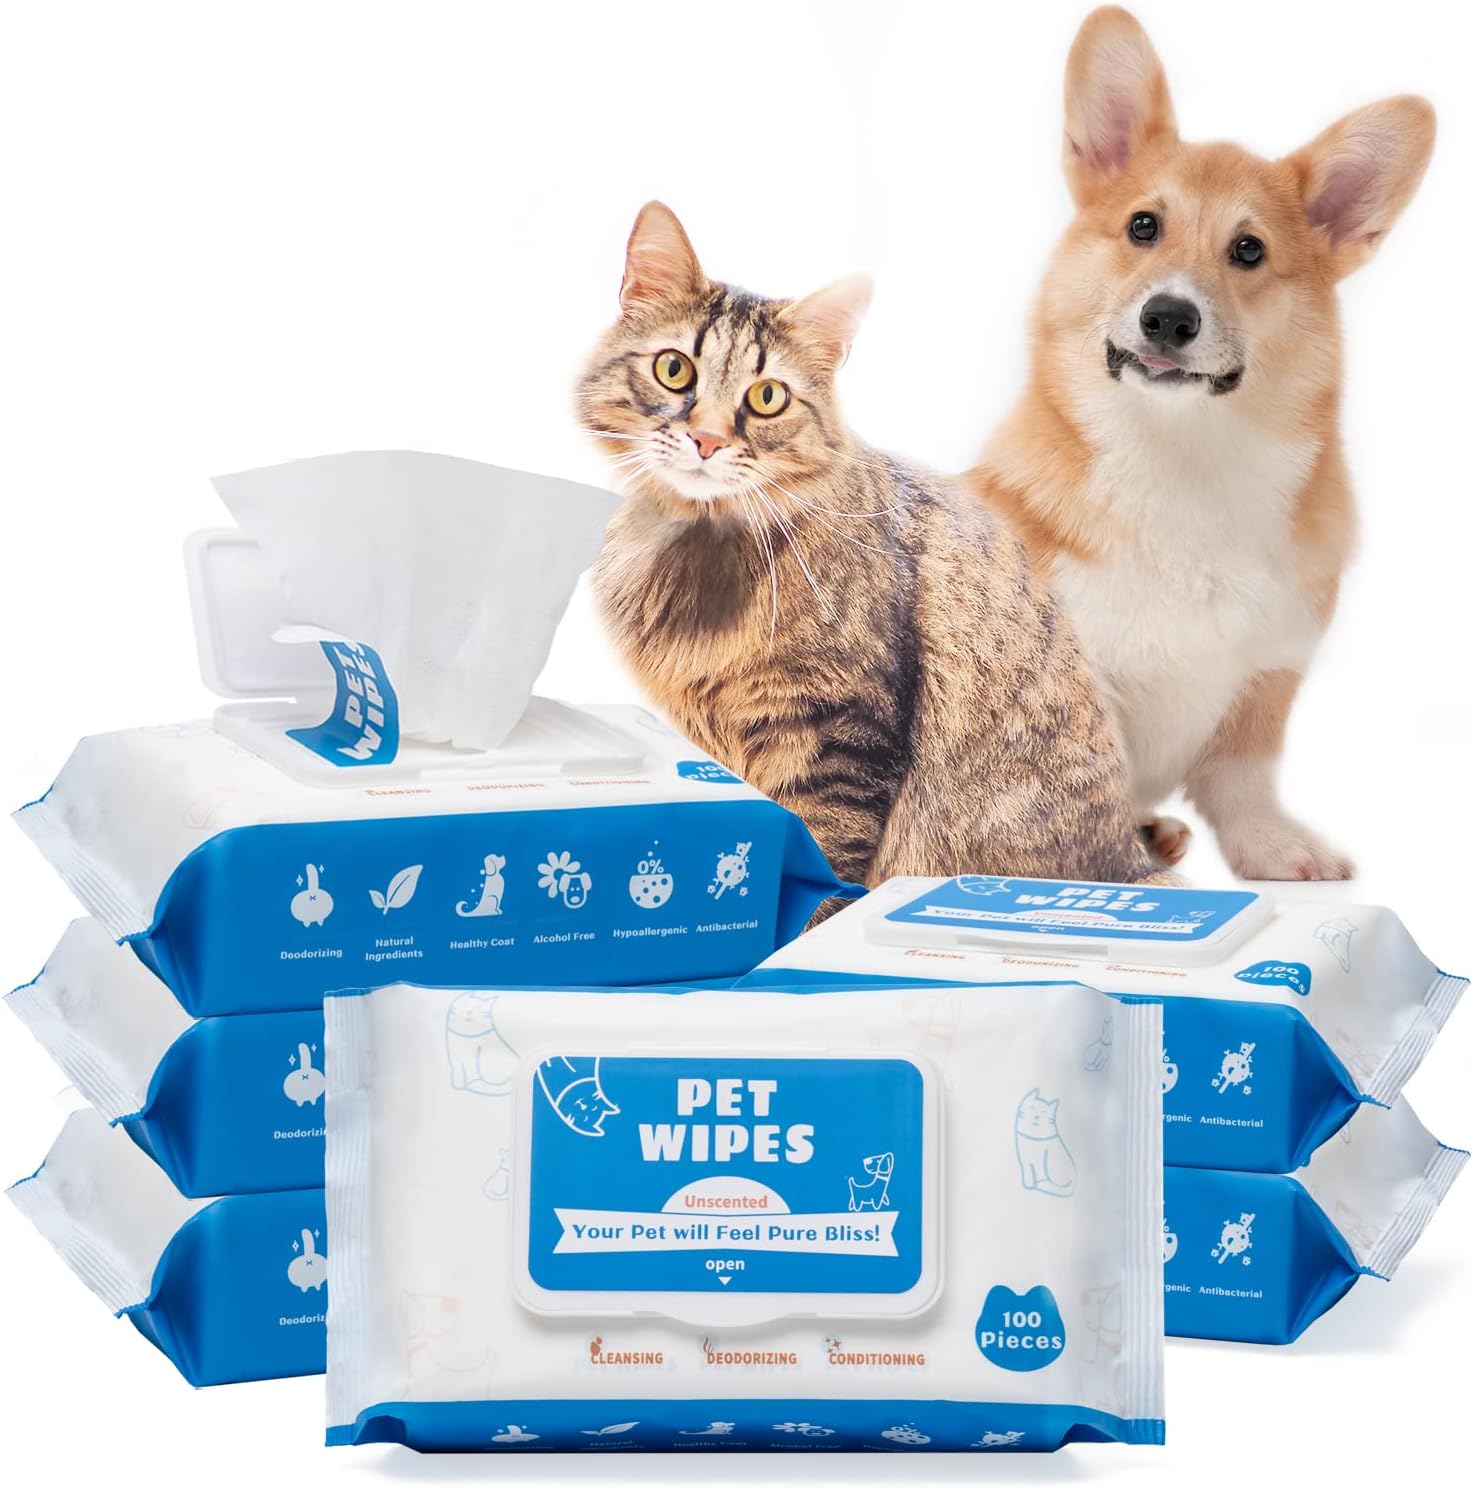 Dog Wipes for Dogs Cats, 600 Count All Purpose Cleaning Pet Wipes, Dog Ear Wipes, Quick Easy Grooming for Bums, Body, Paws, Eyes, for A Easy & Speedy Freshen-Up, 6 Travel Pack of 600 Wipes